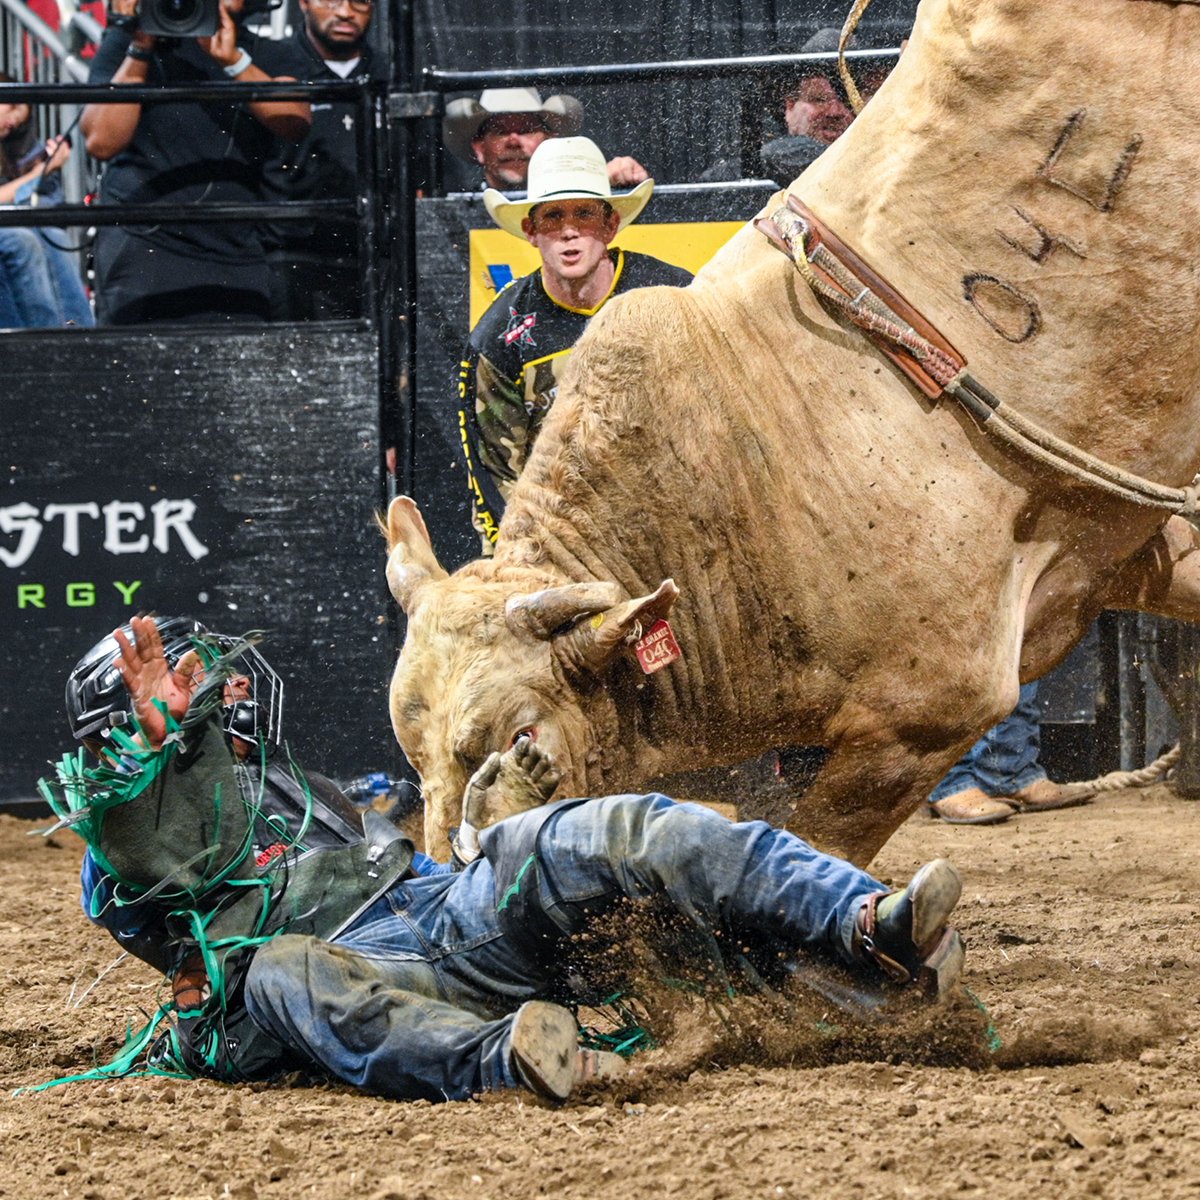 When facing the rankest bovine athletes on the planet, even the best bull riders hit the dirt before the whistle.